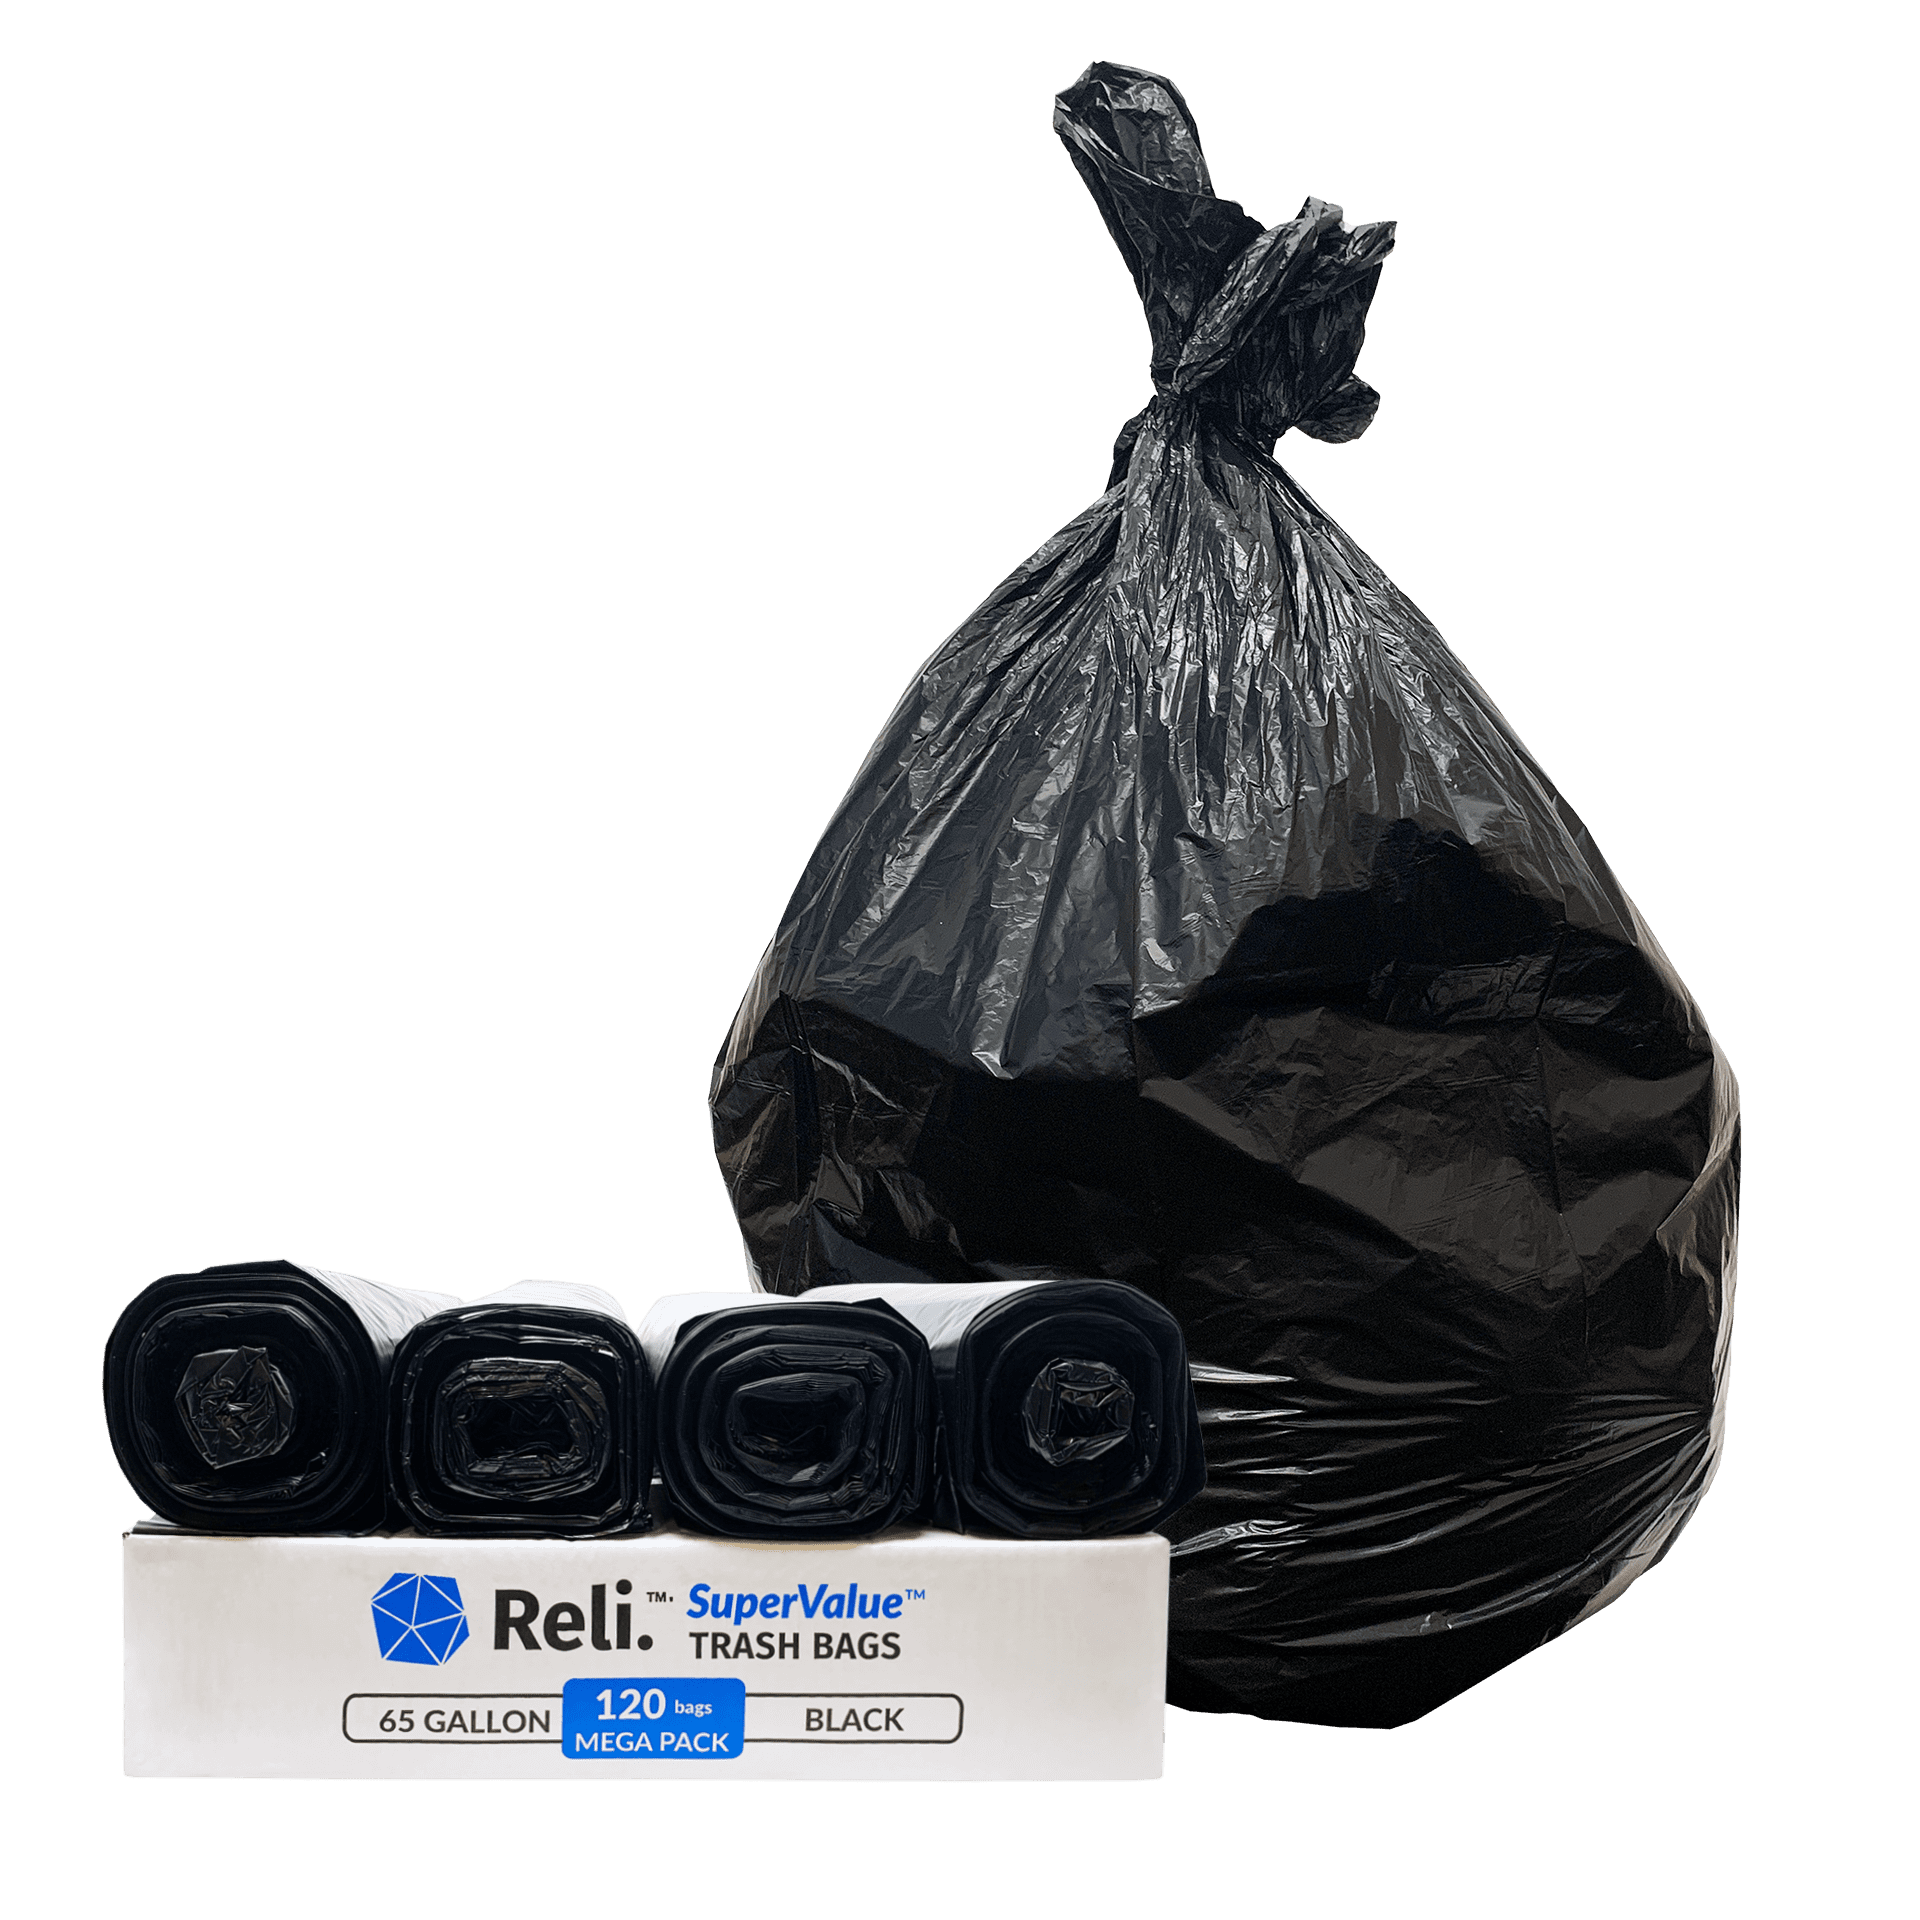 Details about   3pcs Roll Cart Trash Bags Durable Big Mouth Garbage Bags Yard Black 96 Gallon 